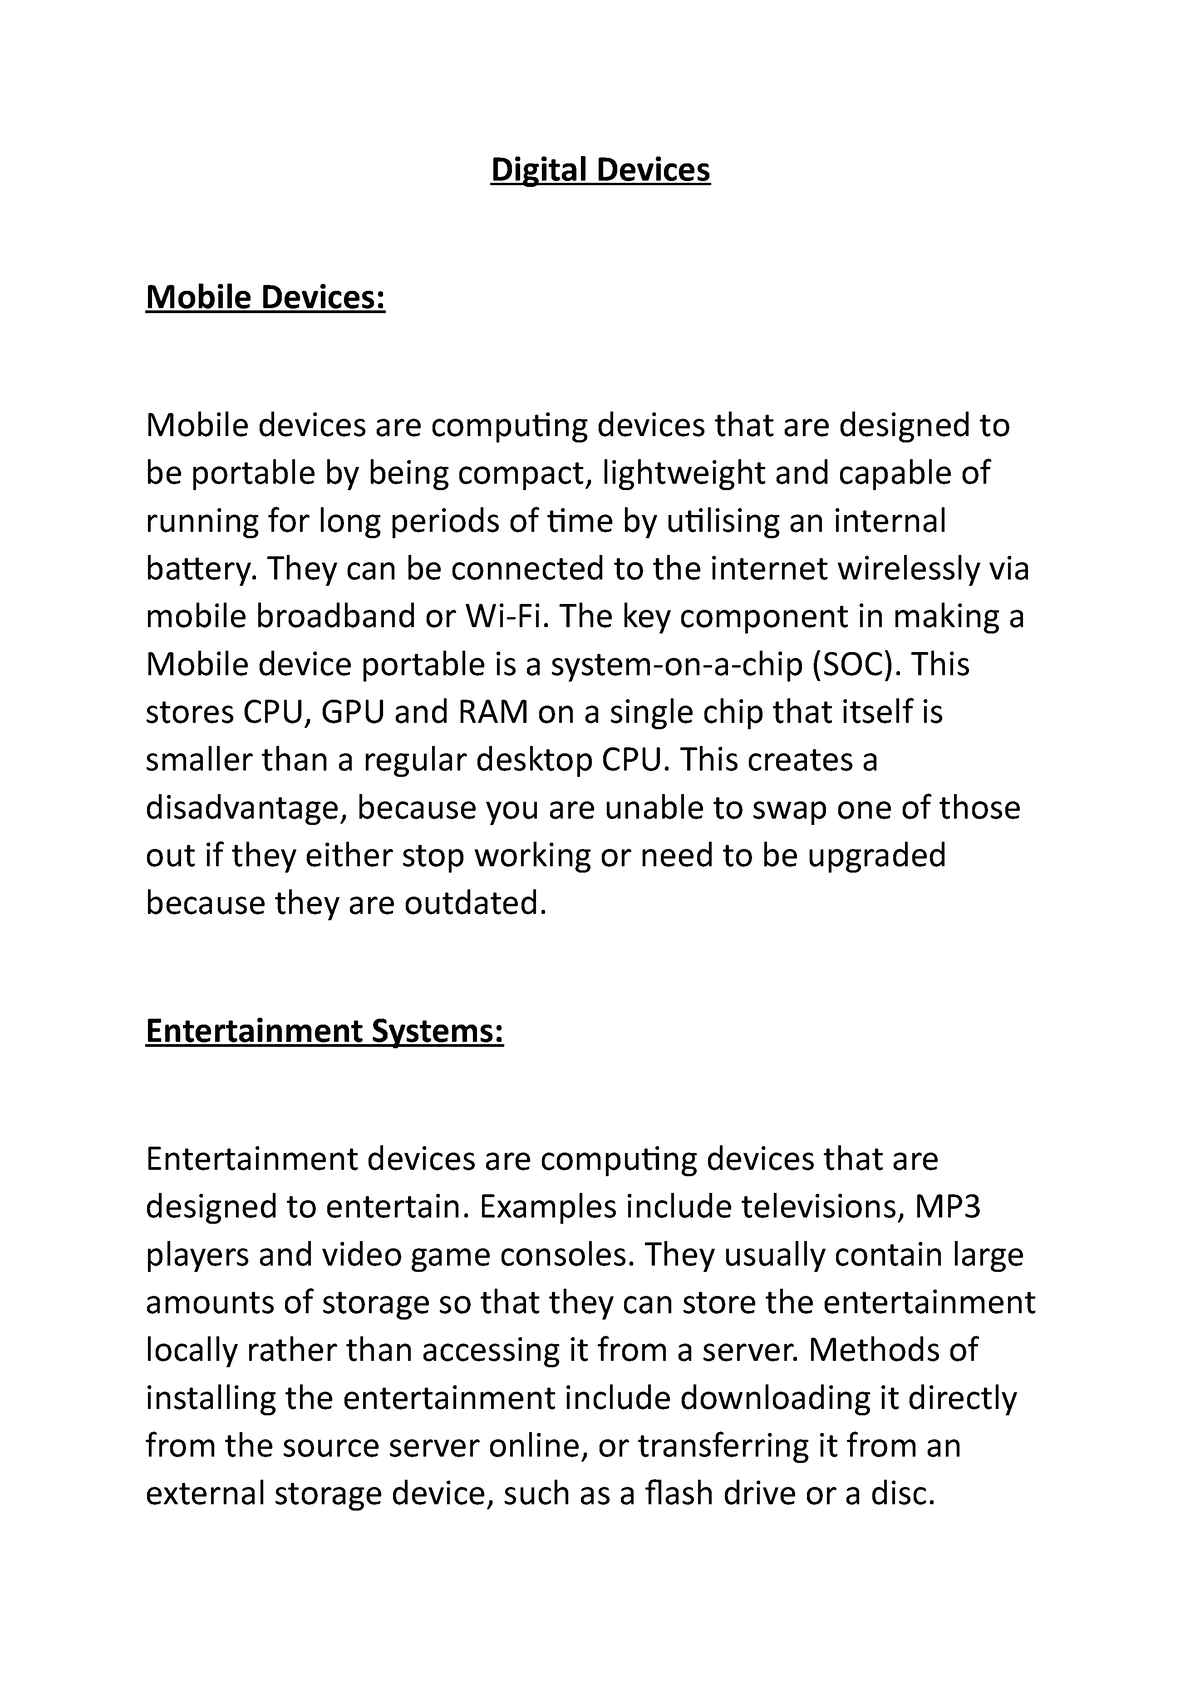 mobile device research paper